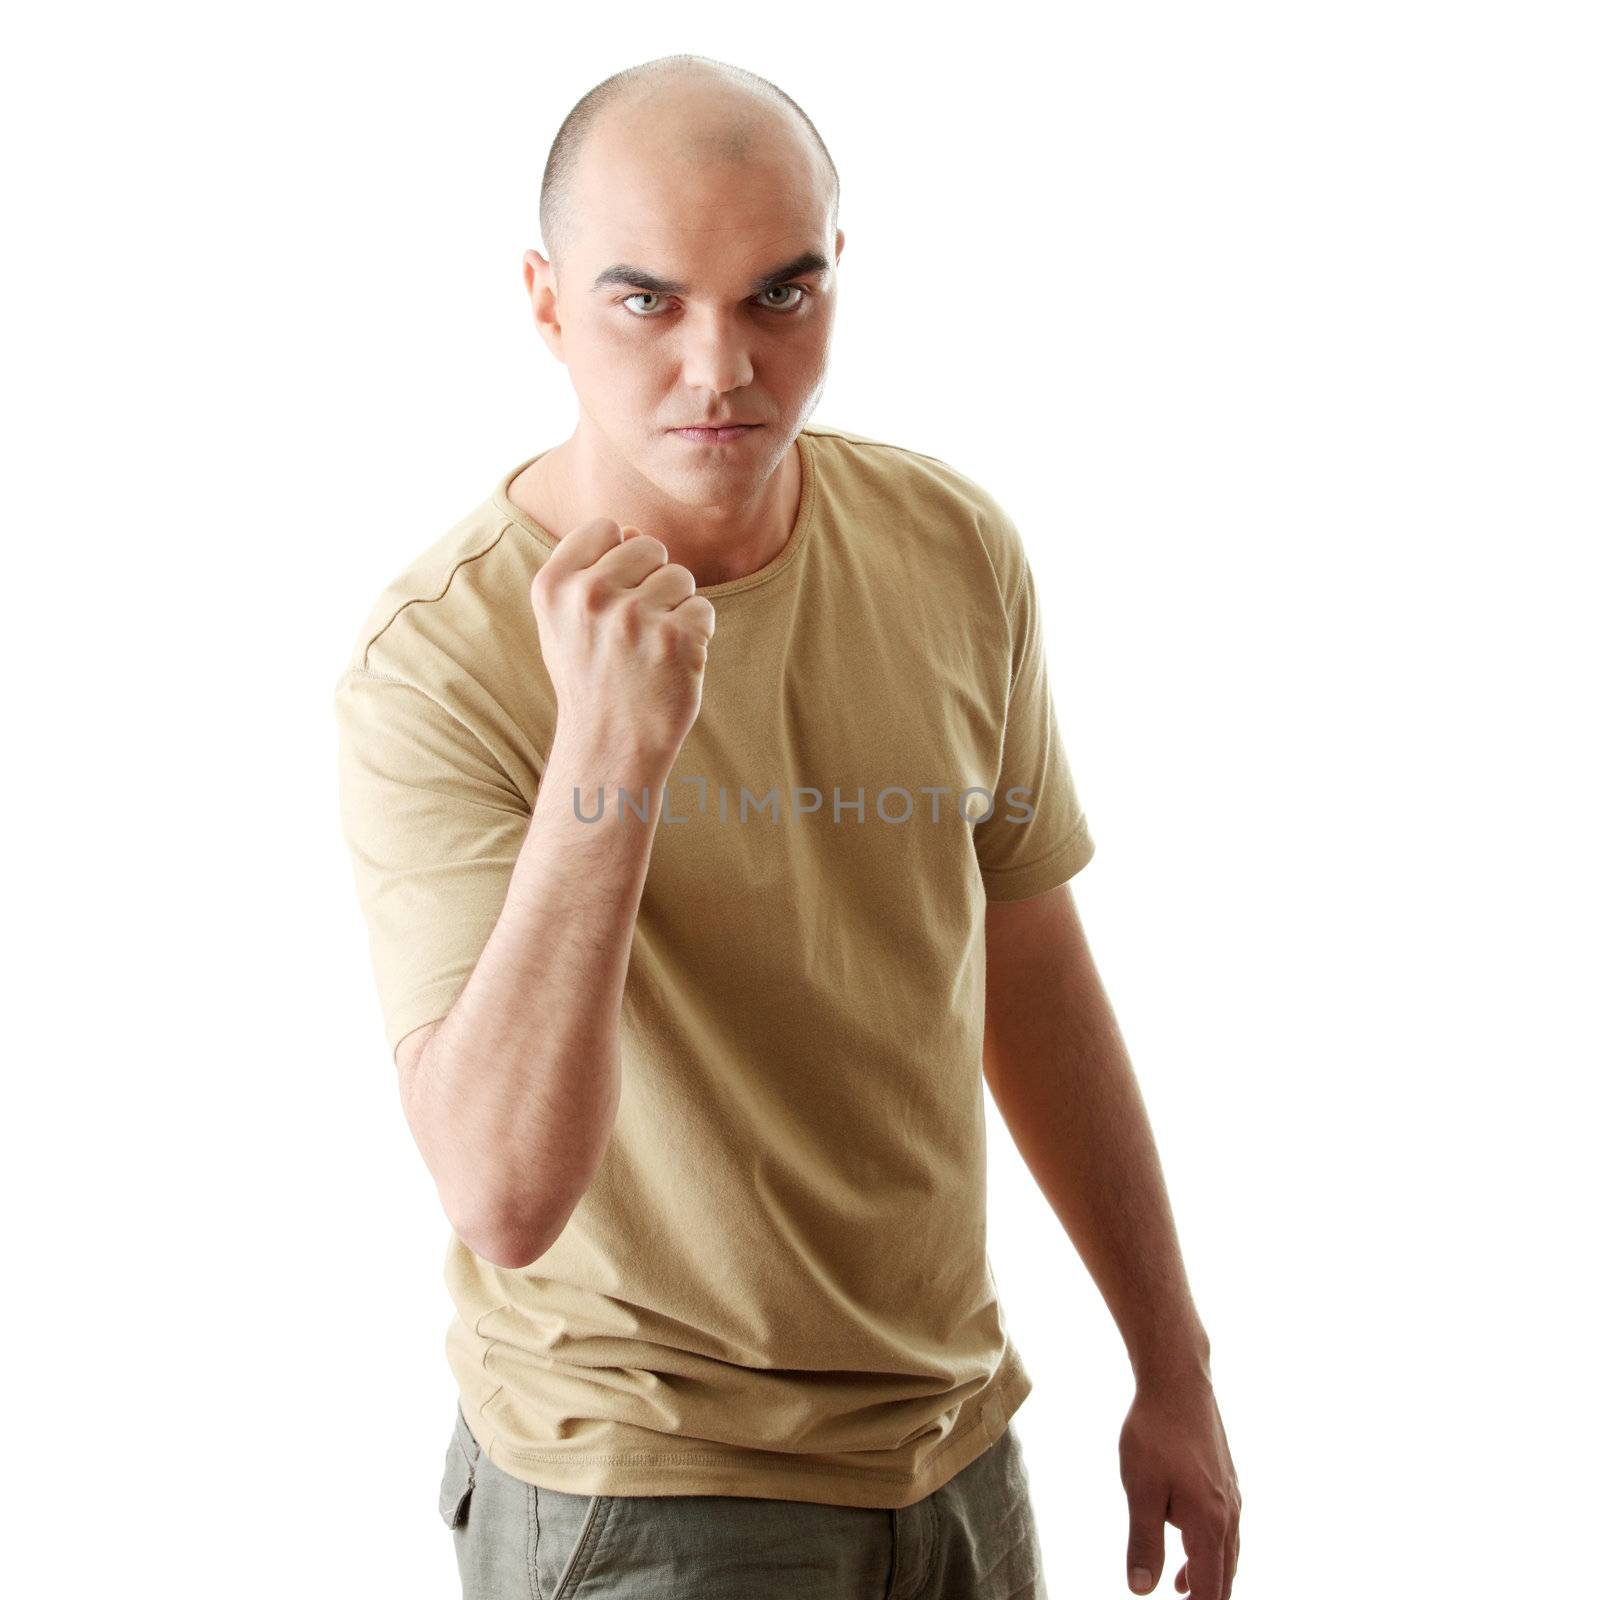 Angry man ready to fight isolated on white background